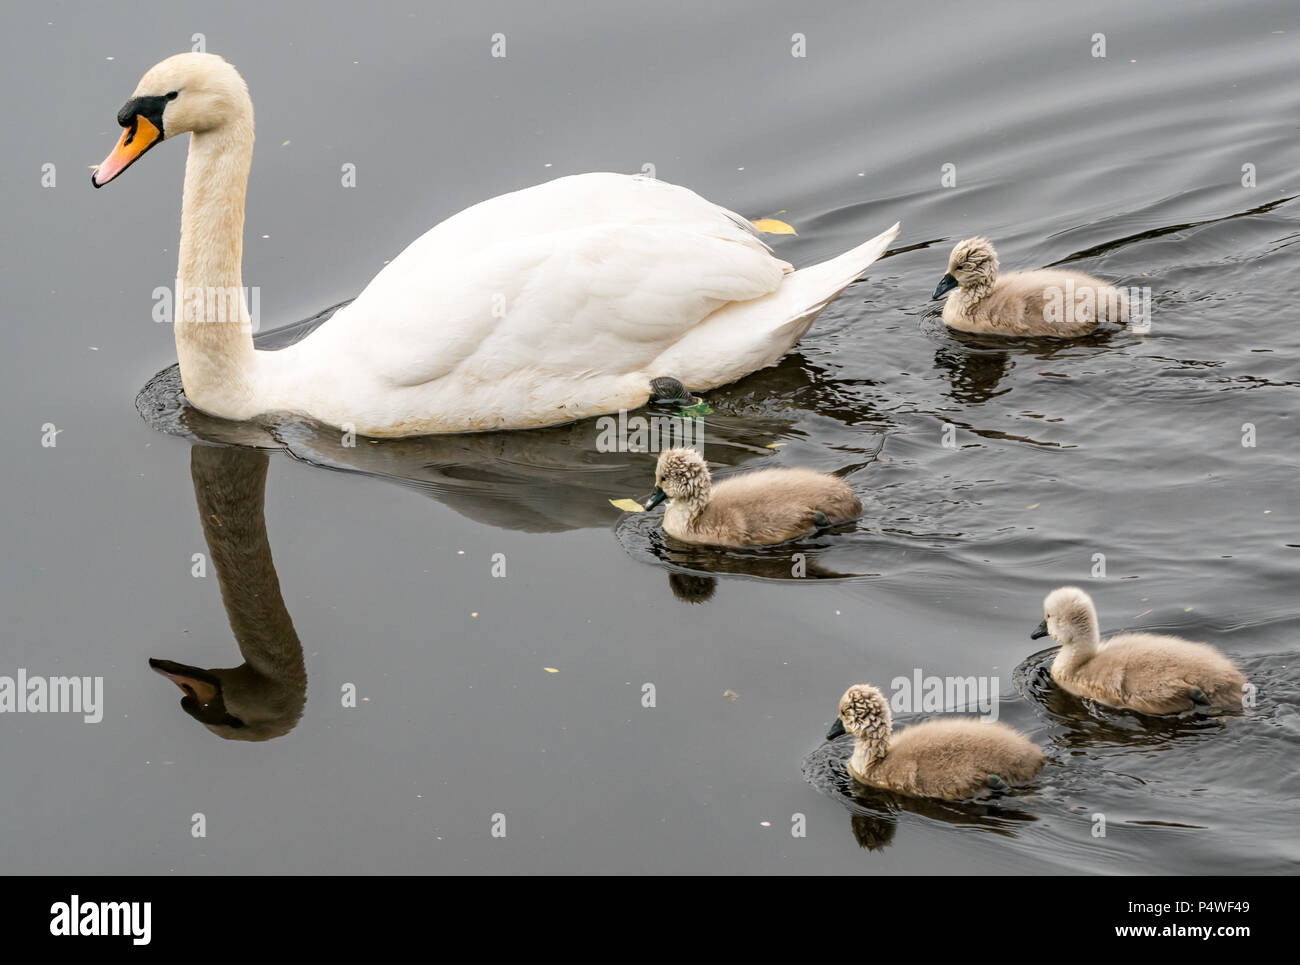 Young cygnets following adult swan swimming in river, Cygnus olor, Water of Leith, Scotland, UK Stock Photo